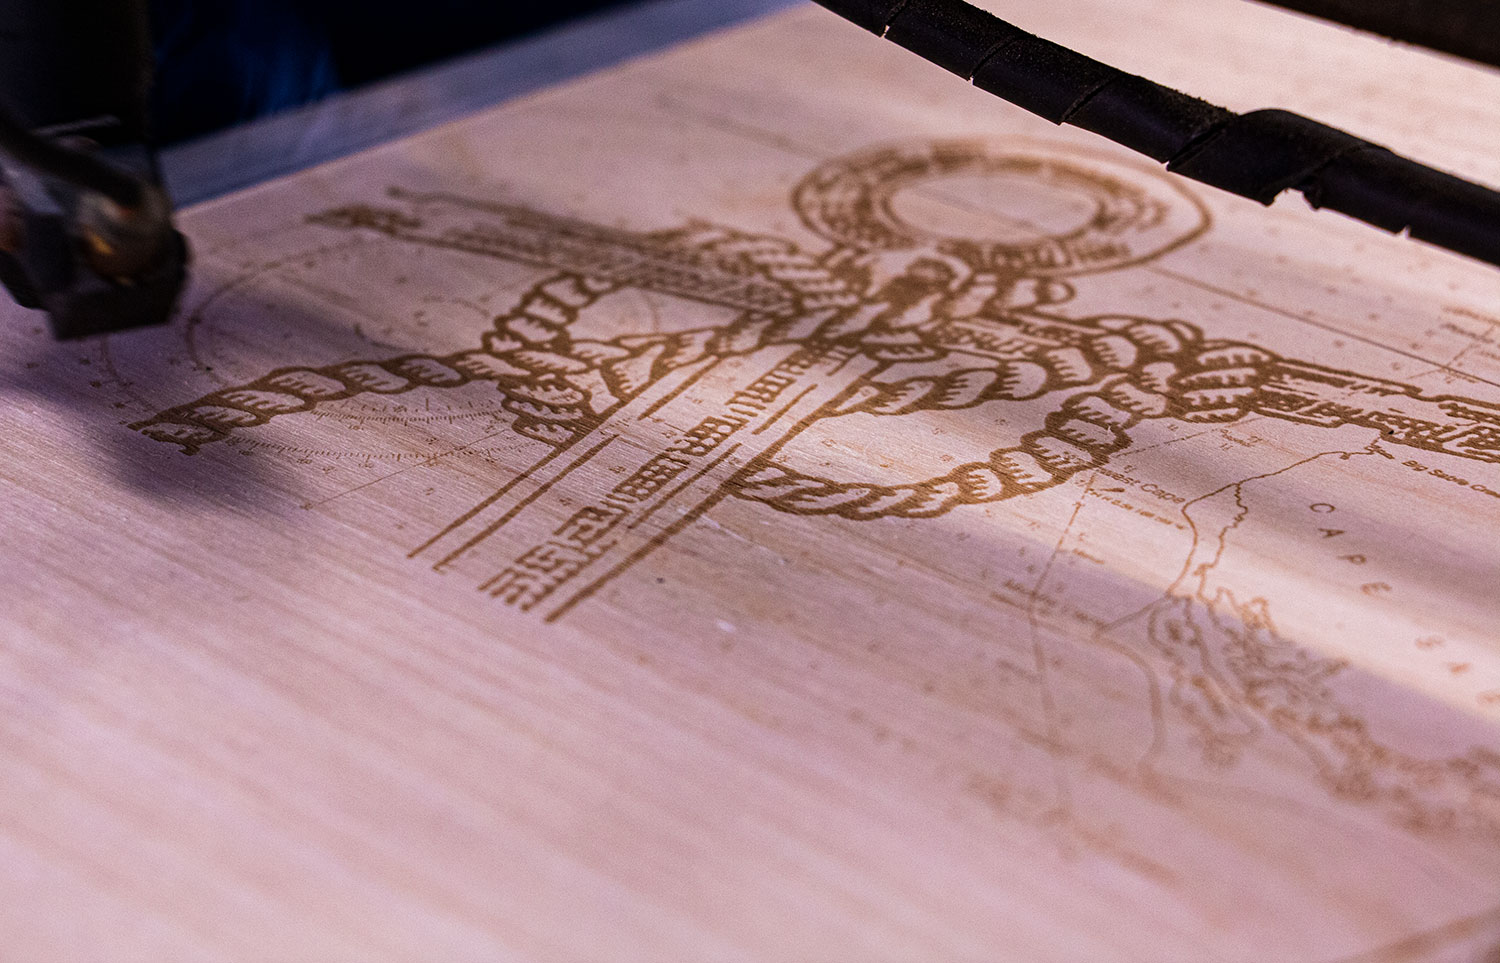 laser maching engraving an anchor and map onto wood